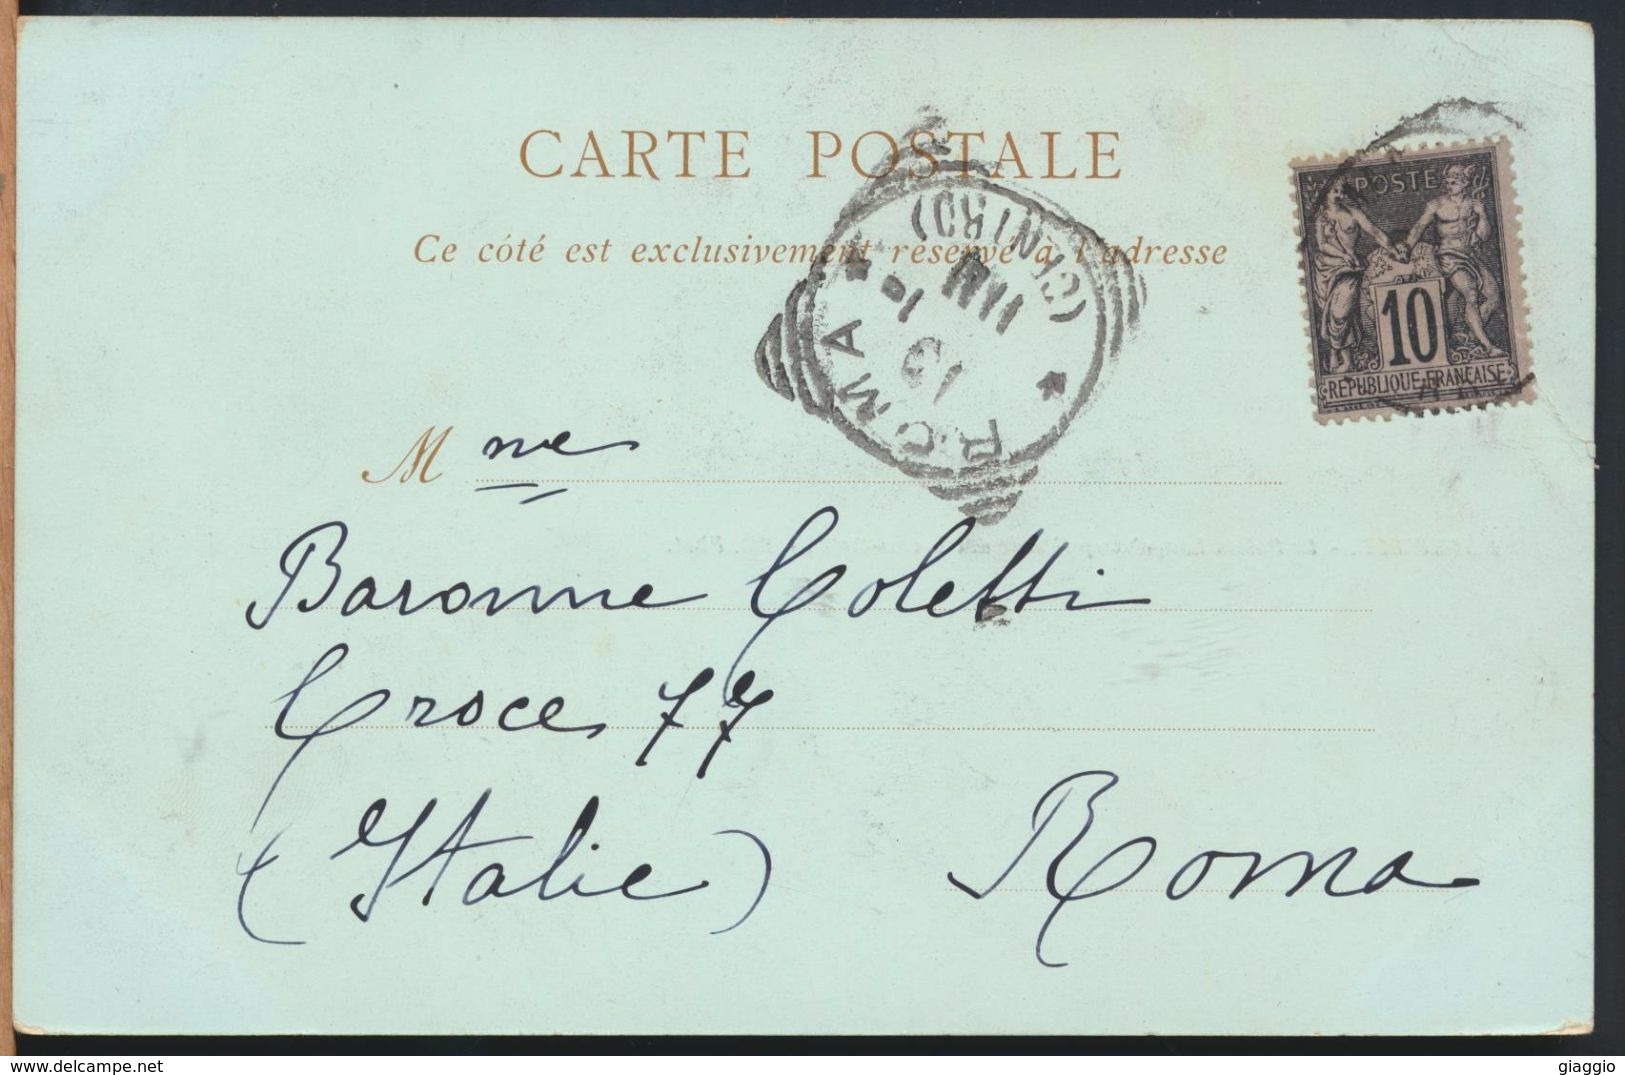 °°° 7288 - FRANCE - 13 - MARSEILLE - LE PALAIS LONGCHAMP MUSEE - 1900 With Stamps °°° - Museen